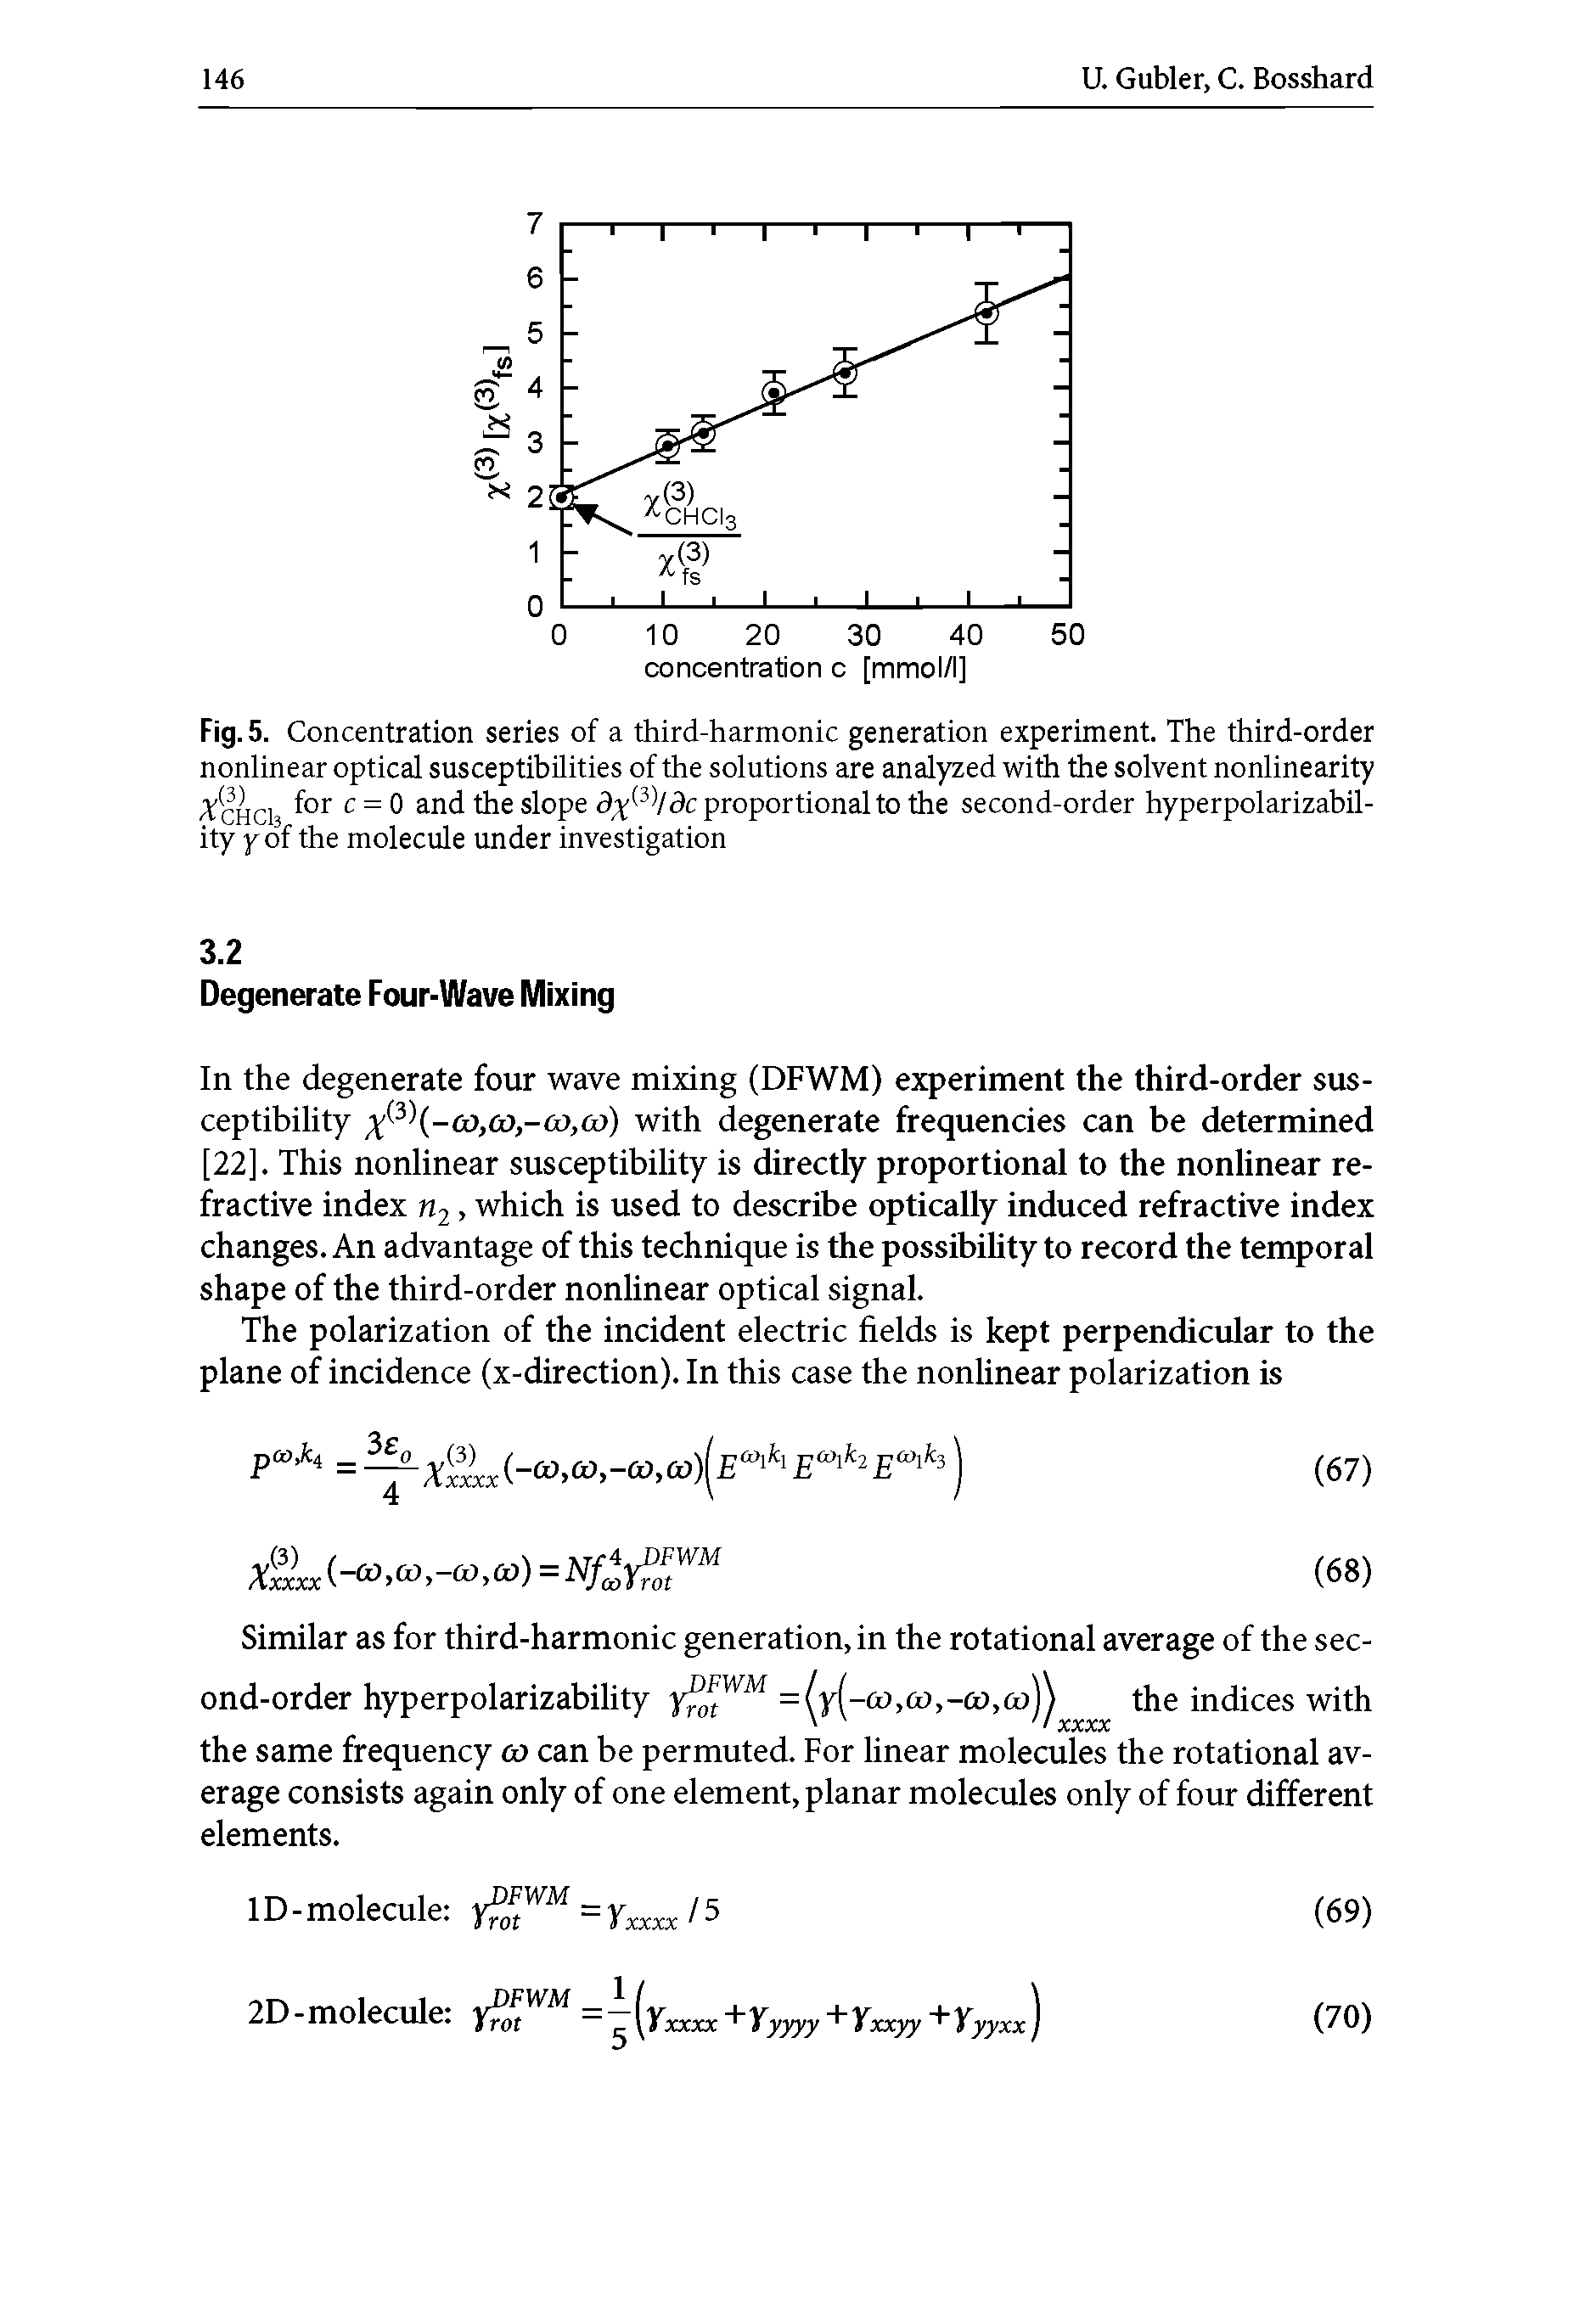 Fig. 5. Concentration series of a third-harmonic generation experiment. The third-order nonlinear optical susceptibilities of the solutions are analyzed with the solvent nonlinearity -Tchci f°r c = 0 and the slope dx ldc proportional to the second-order hyperpolarizability yof the molecule under investigation...